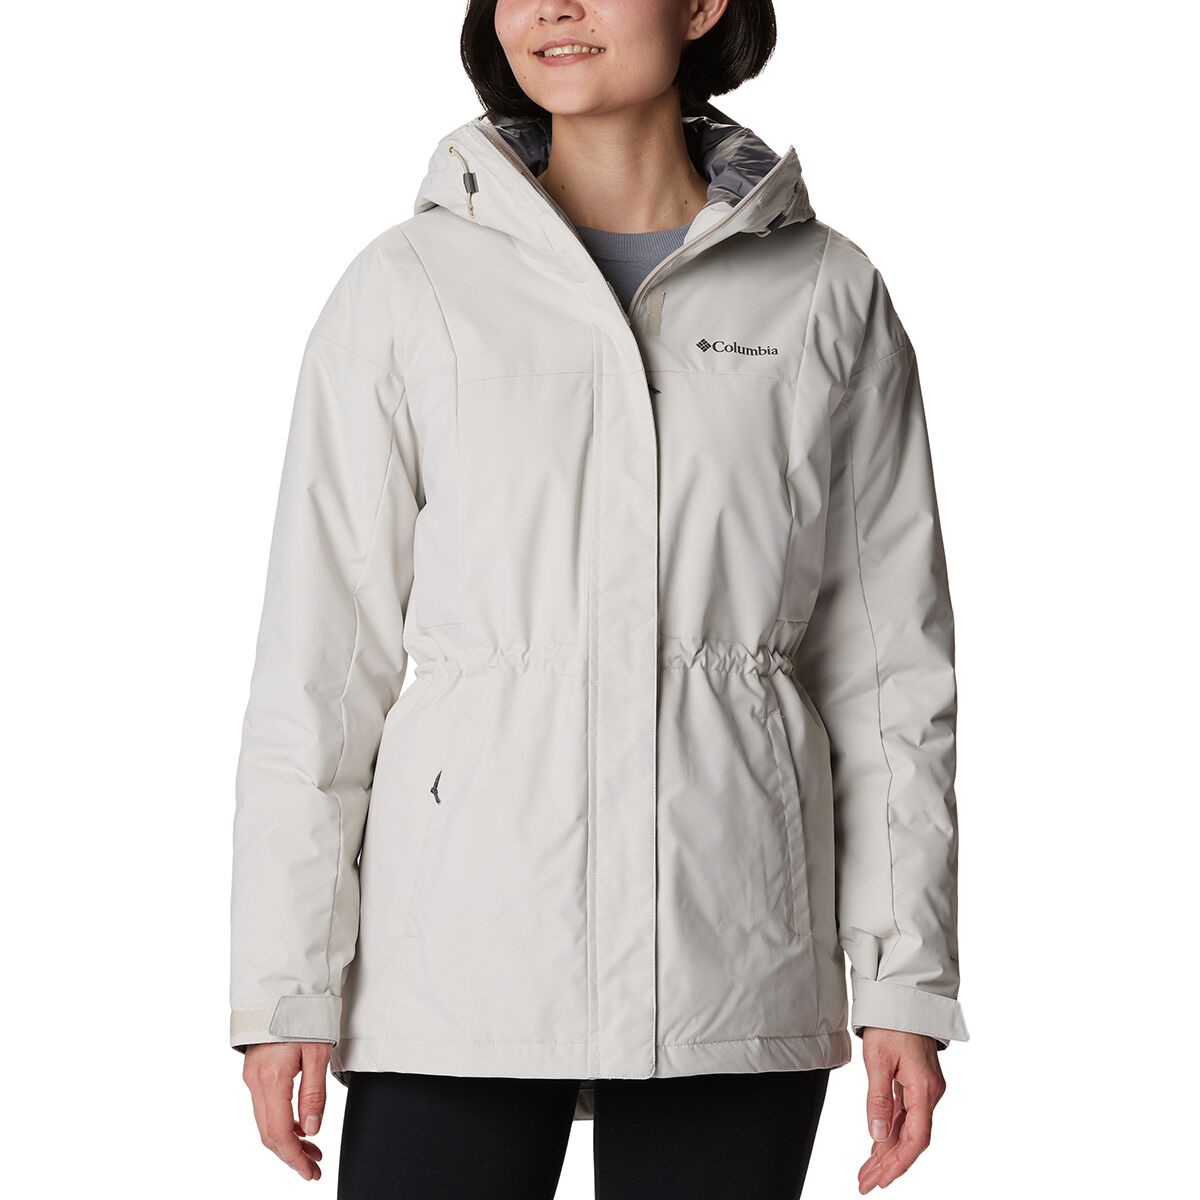 Hikebound Long Insulated Jacket - Women